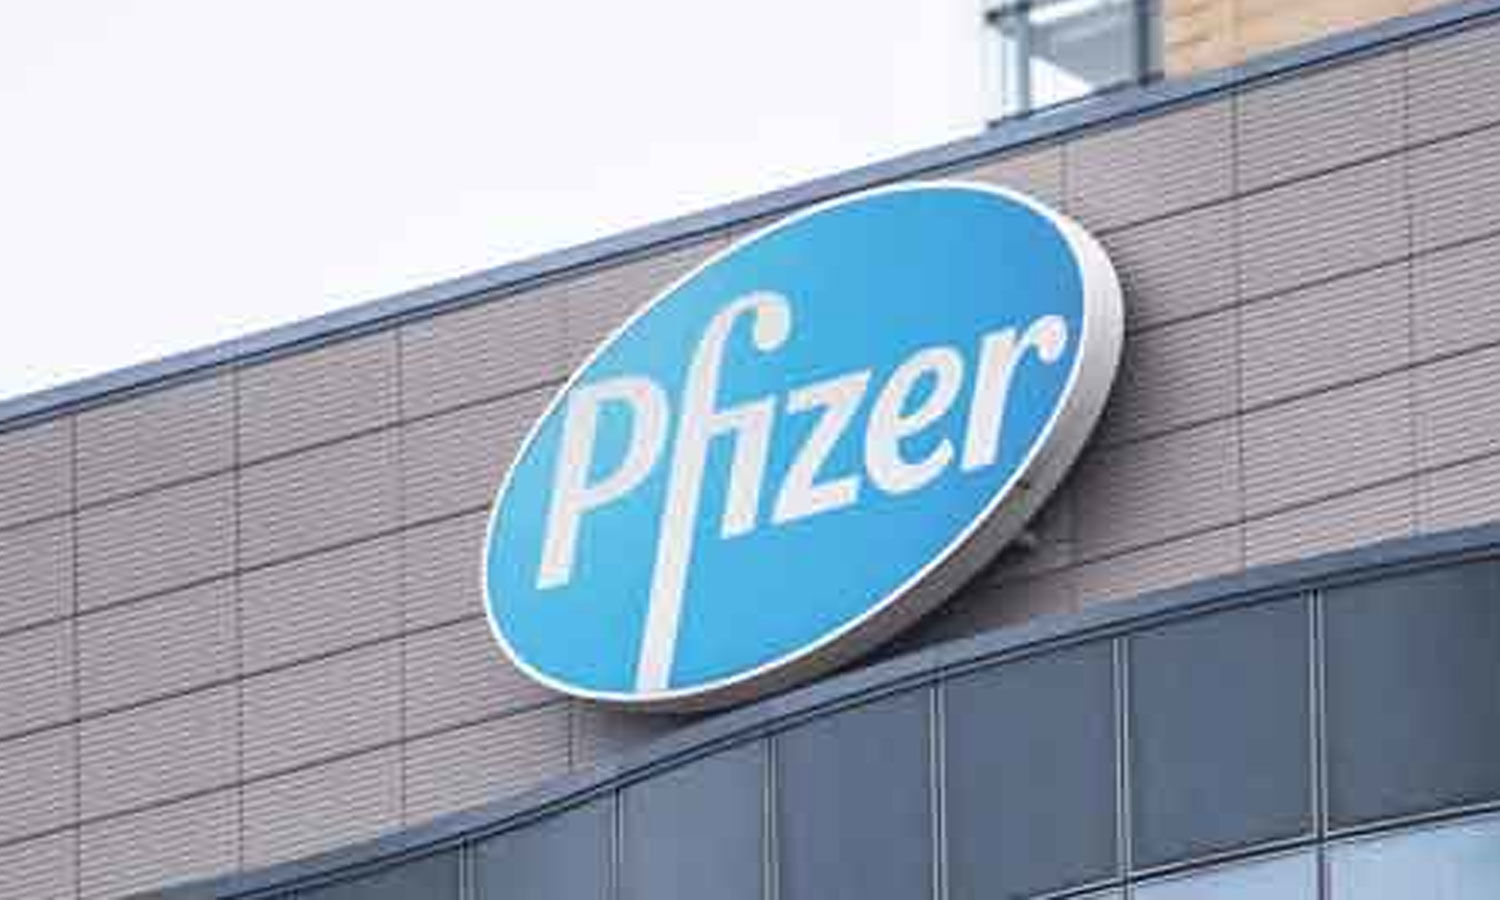 The US-based pharma company Pfizer has withdrawn its application for emergency-use authorization of its COVID-19 vaccine in India.